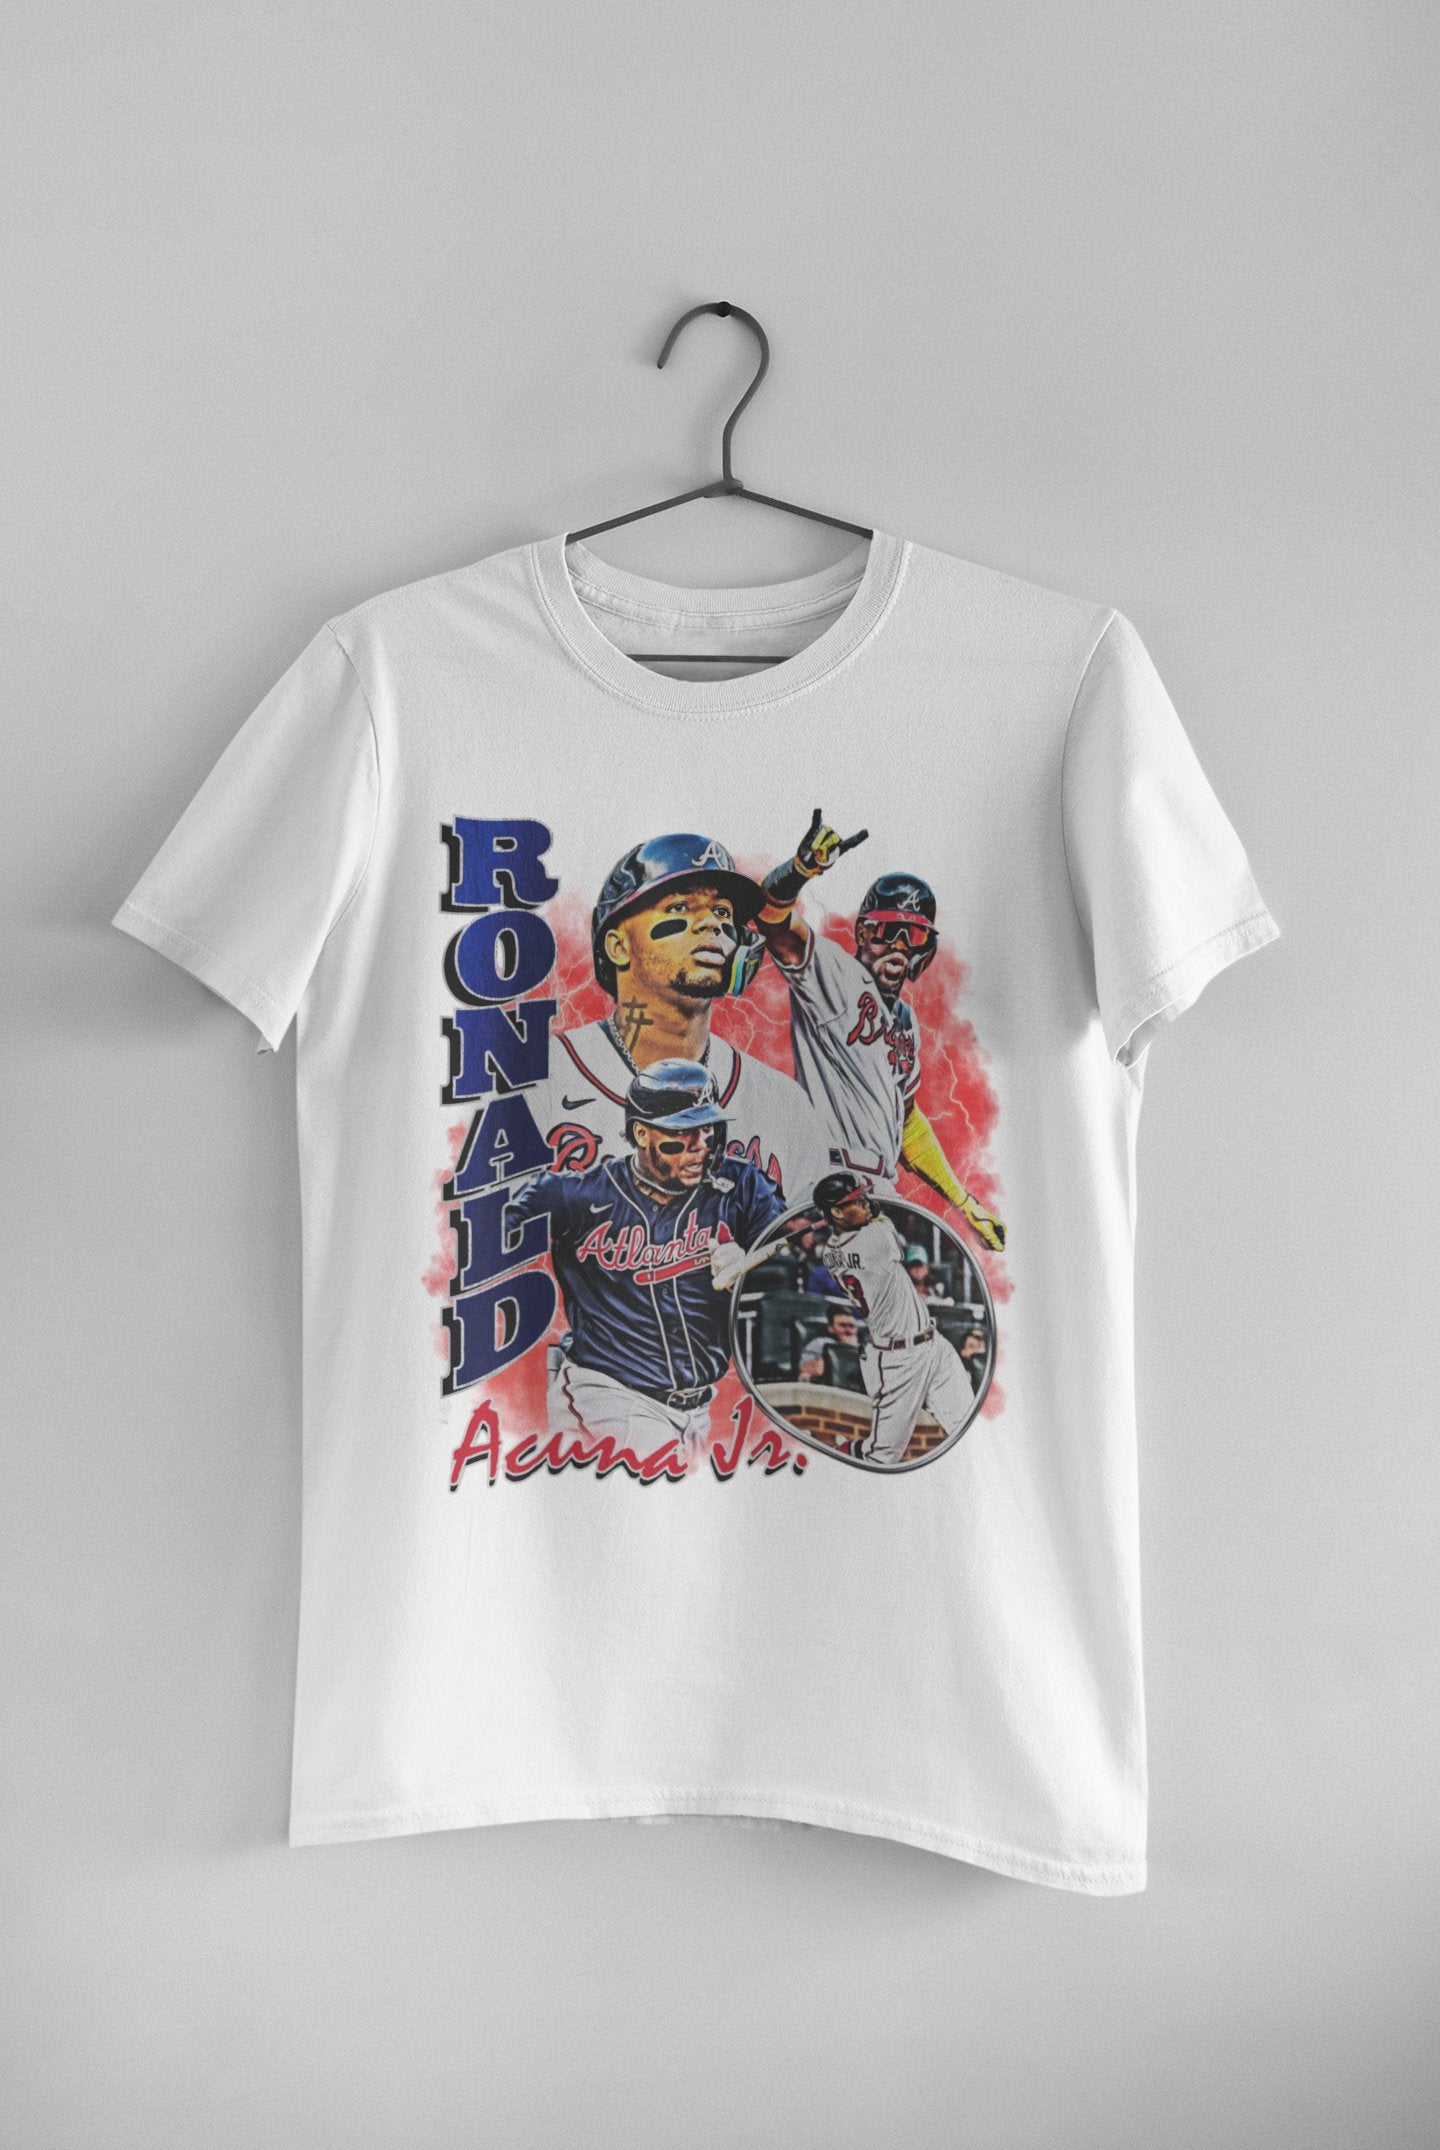 ladypixels Vintage 90s Graphic Style Ronald Acuna Jr T-Shirt, Vintage Oversized Sport Tee, Retro American Baseball Bootleg Gift